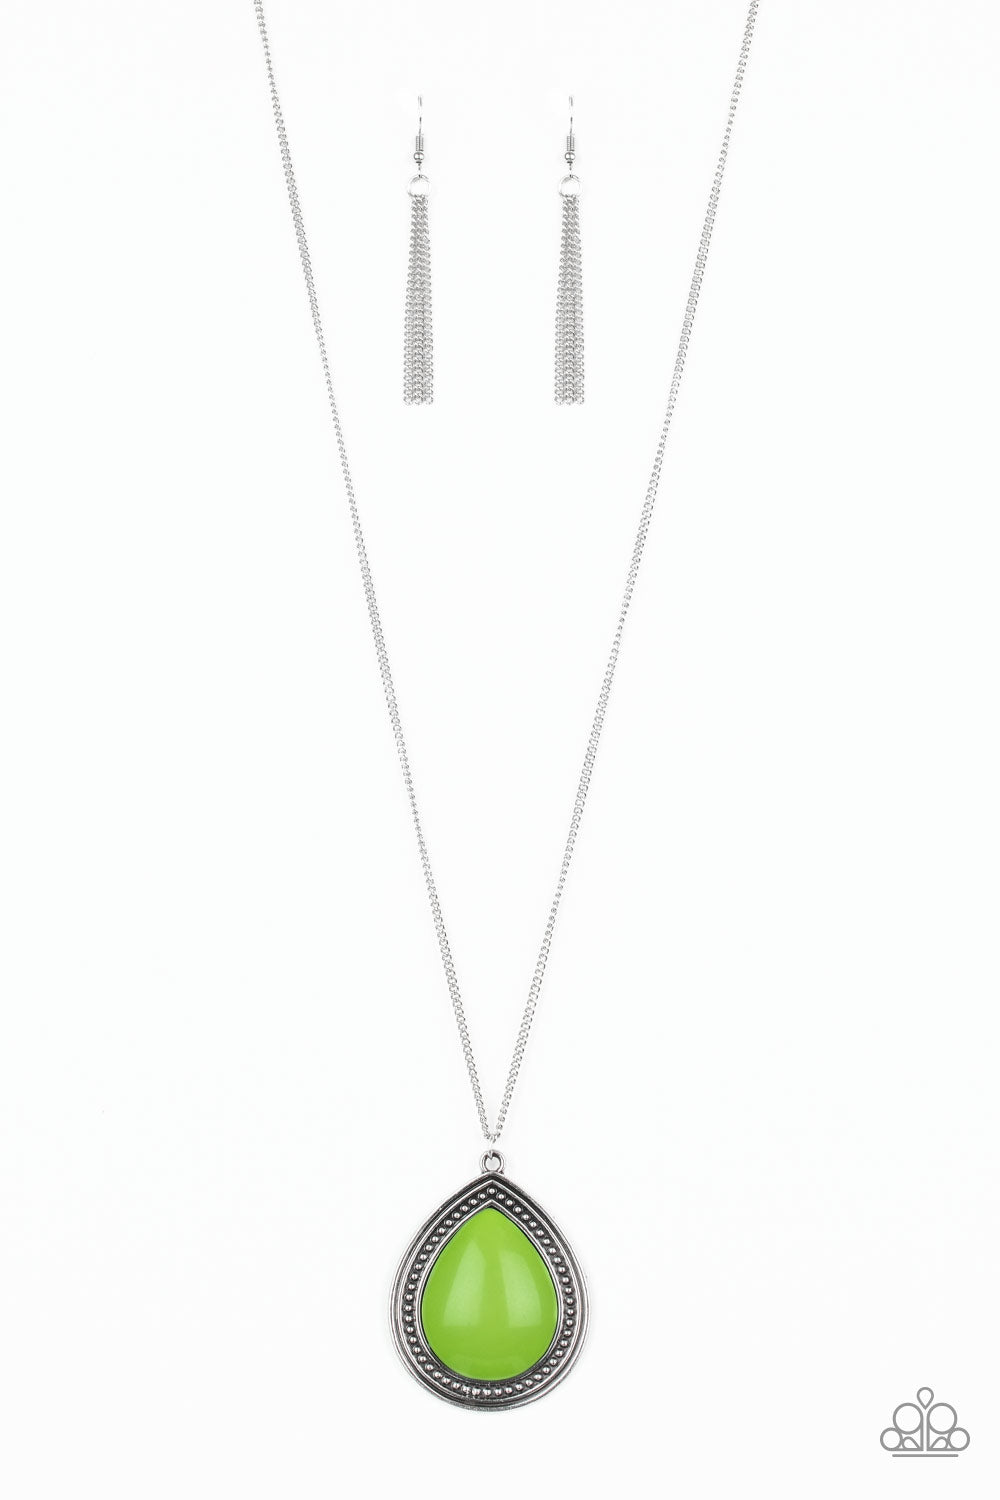 Paparazzi Accessories Chroma Courageous - Green Necklaces - Lady T Accessories